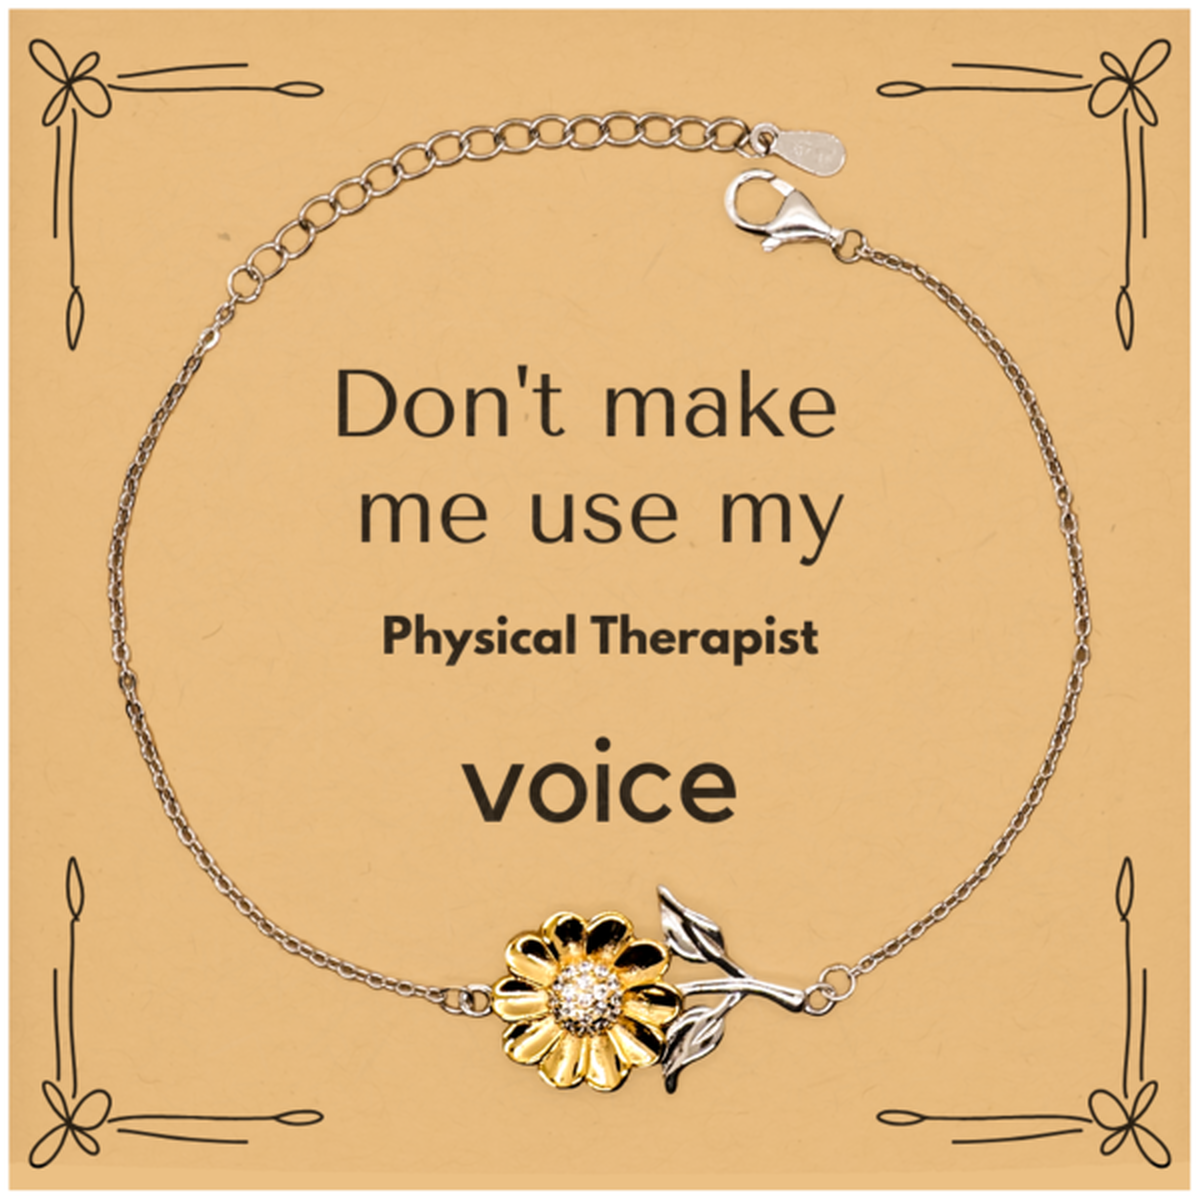 Don't make me use my Physical Therapist voice, Sarcasm Physical Therapist Card Gifts, Christmas Physical Therapist Sunflower Bracelet Birthday Unique Gifts For Physical Therapist Coworkers, Men, Women, Colleague, Friends